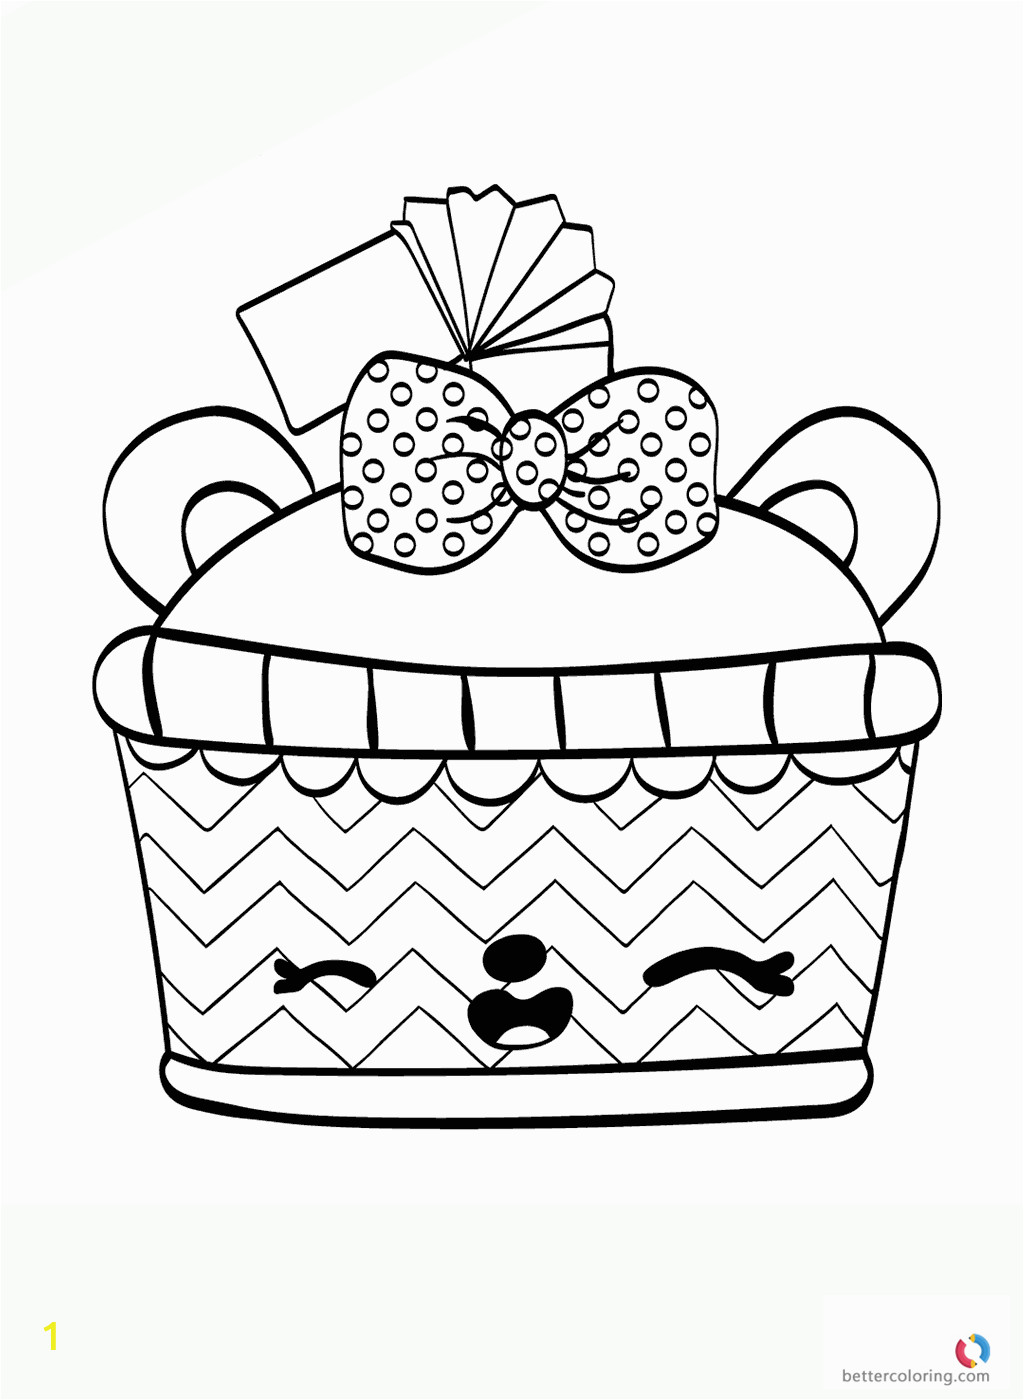 Num Nom Coloring Pages Black and White Num Noms Colouring Page Cassie Cola Free Printable